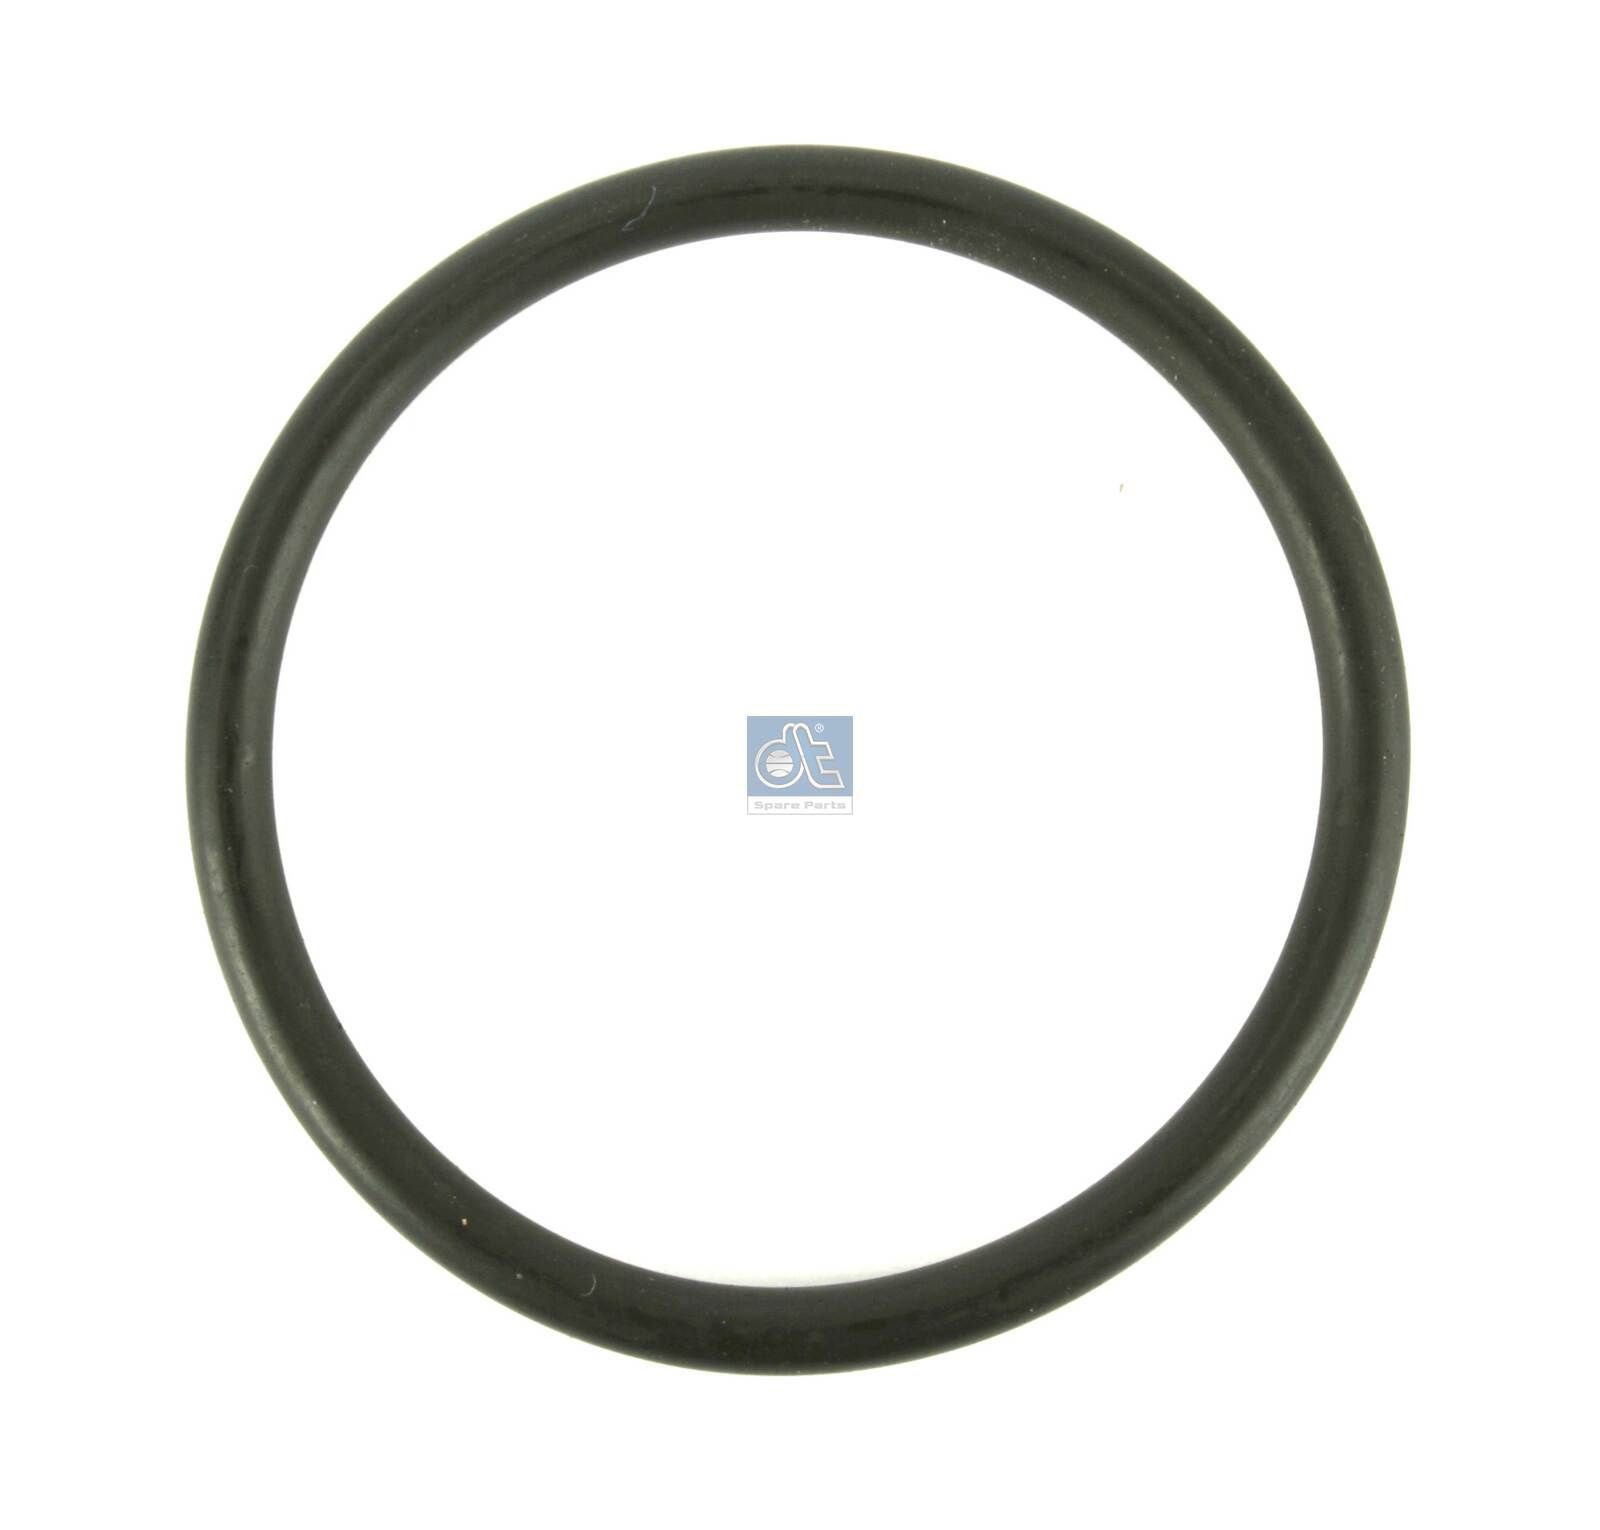 DT Spare Parts 4.20242 Seal Ring 000 997 53 48